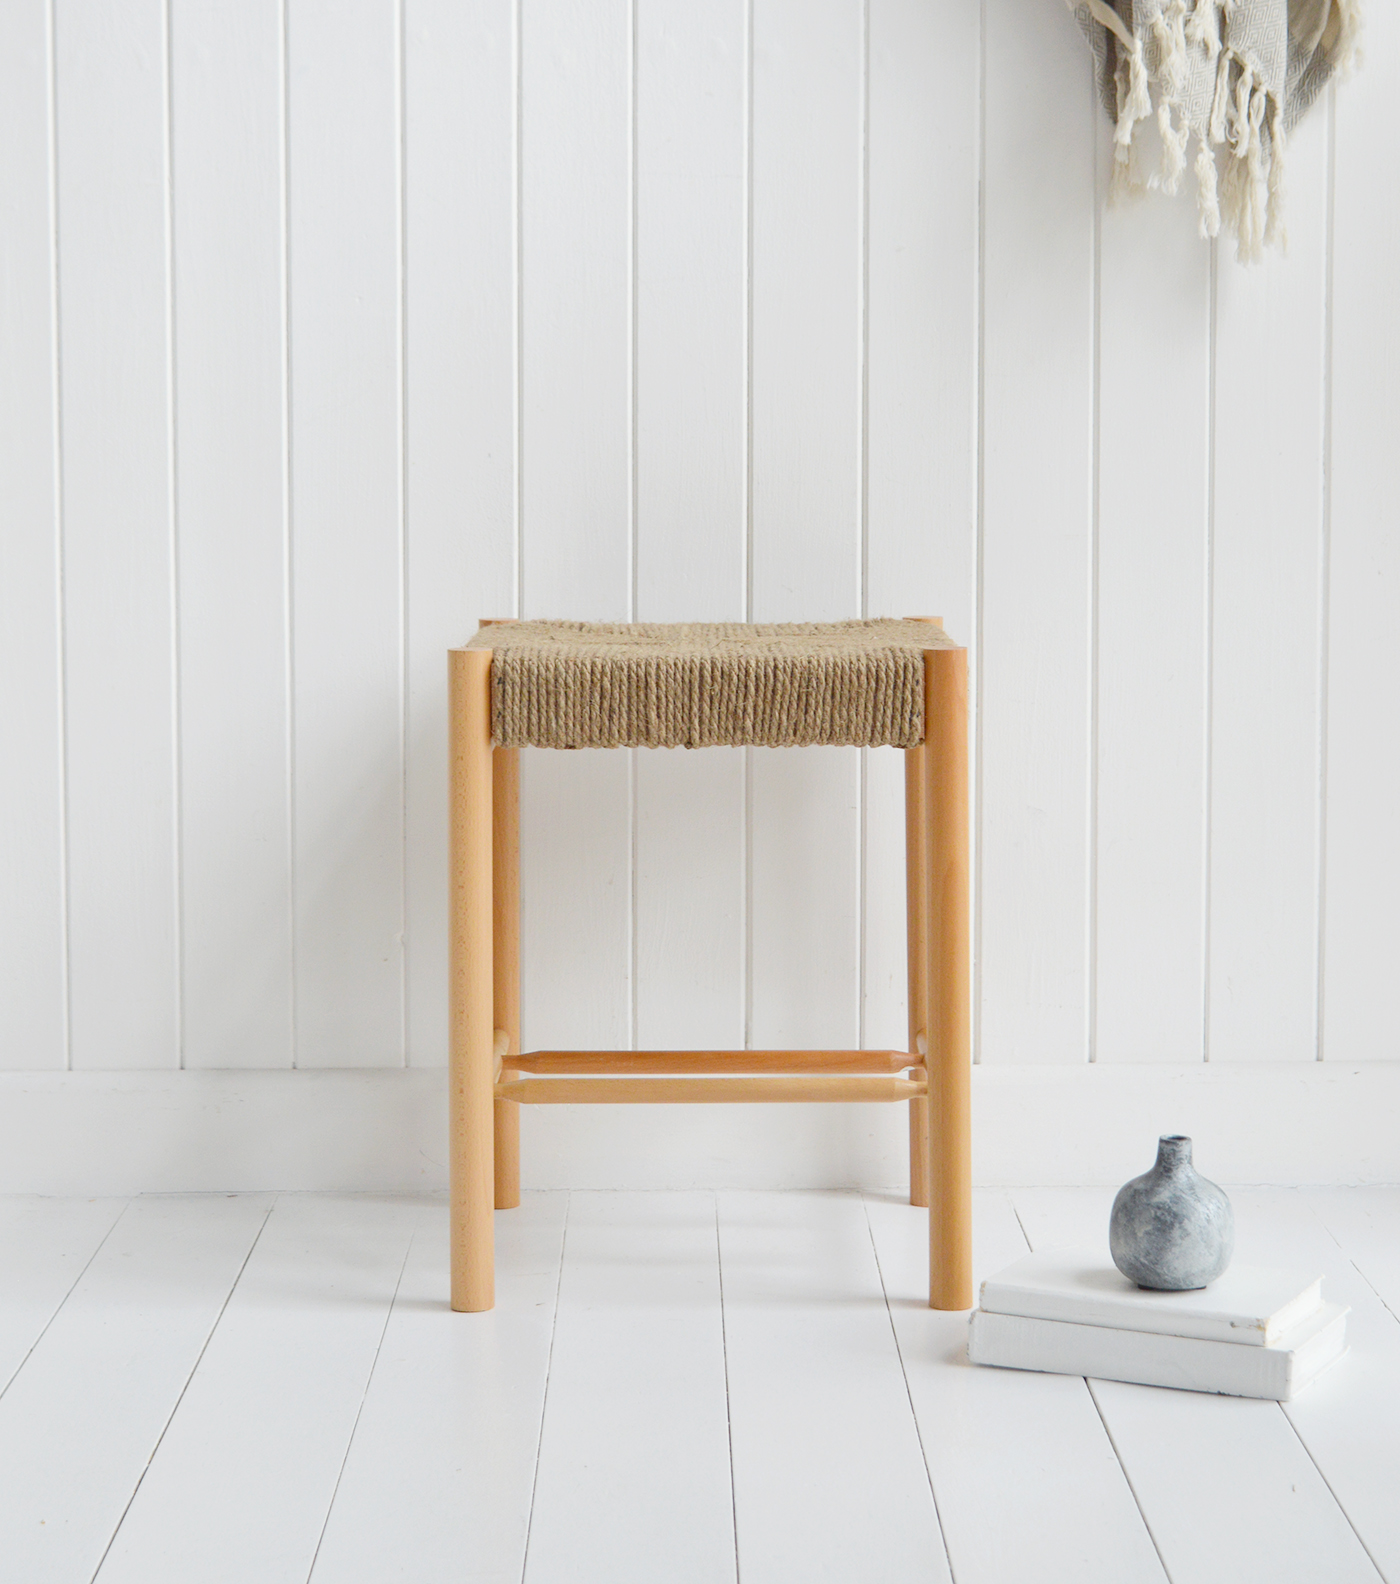 Wakefield Woven Wooden stool - Bench and Stool for New England modern farmhouse, country and coastal furniture and interiors